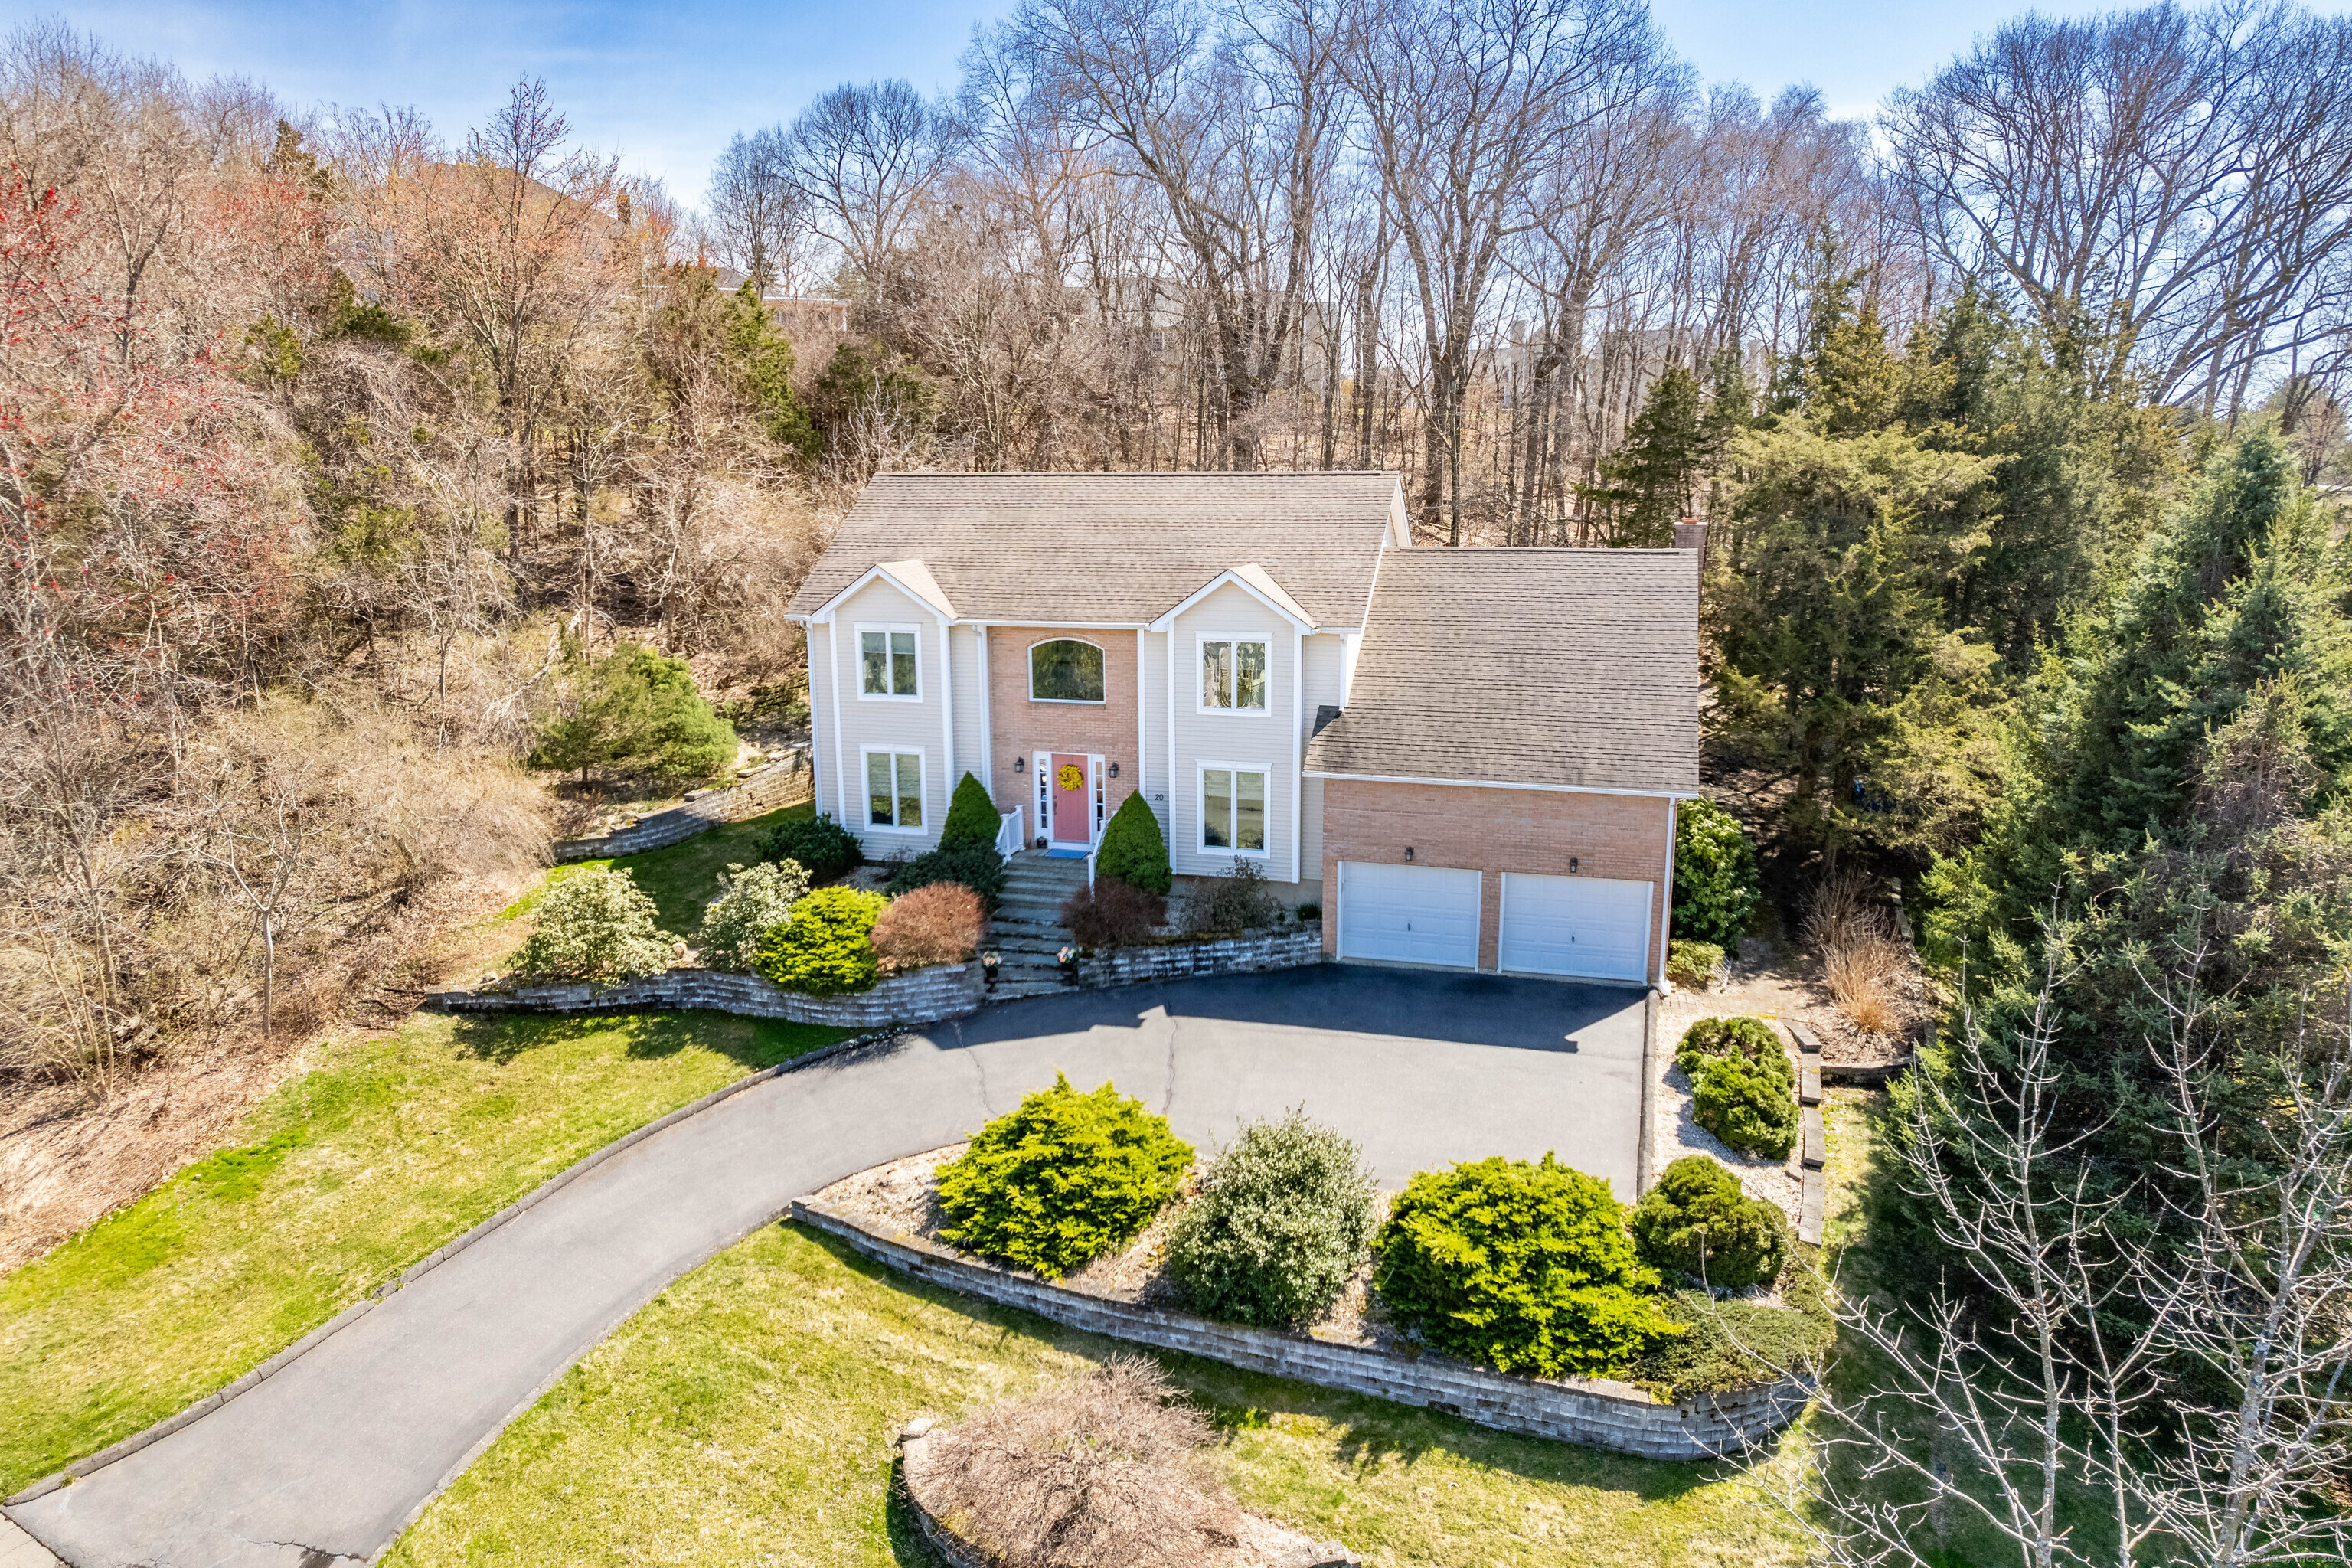 Come see 20 Fox Hill Drive in Rocky Hill! This is a delightful and spacious Colonial located in one of Rocky Hill's premiere communities. The first floor features an open floor plan with the kitchen and large, vaulted-ceiling living room that is perfect for entertaining and family time. One of the bedrooms is on the first floor that can also be used as an office or den. Upstairs are three bedrooms, all well-sized, and the primary has a large walk-in closet and gorgeous updated bathroom. The basement is partially finished and so adds another 625 square feet of finished space with a 1/2 bath - great for an additional living area! The yard is large, level and private and can accommodate many outdoor gatherings. The home is in excellent mechanical and structural condition, has central air, and is on town sewer and water, and there's natural gas in the street, making for turnkey maintenance. Schedule your appointment ASAP - you'll love it!